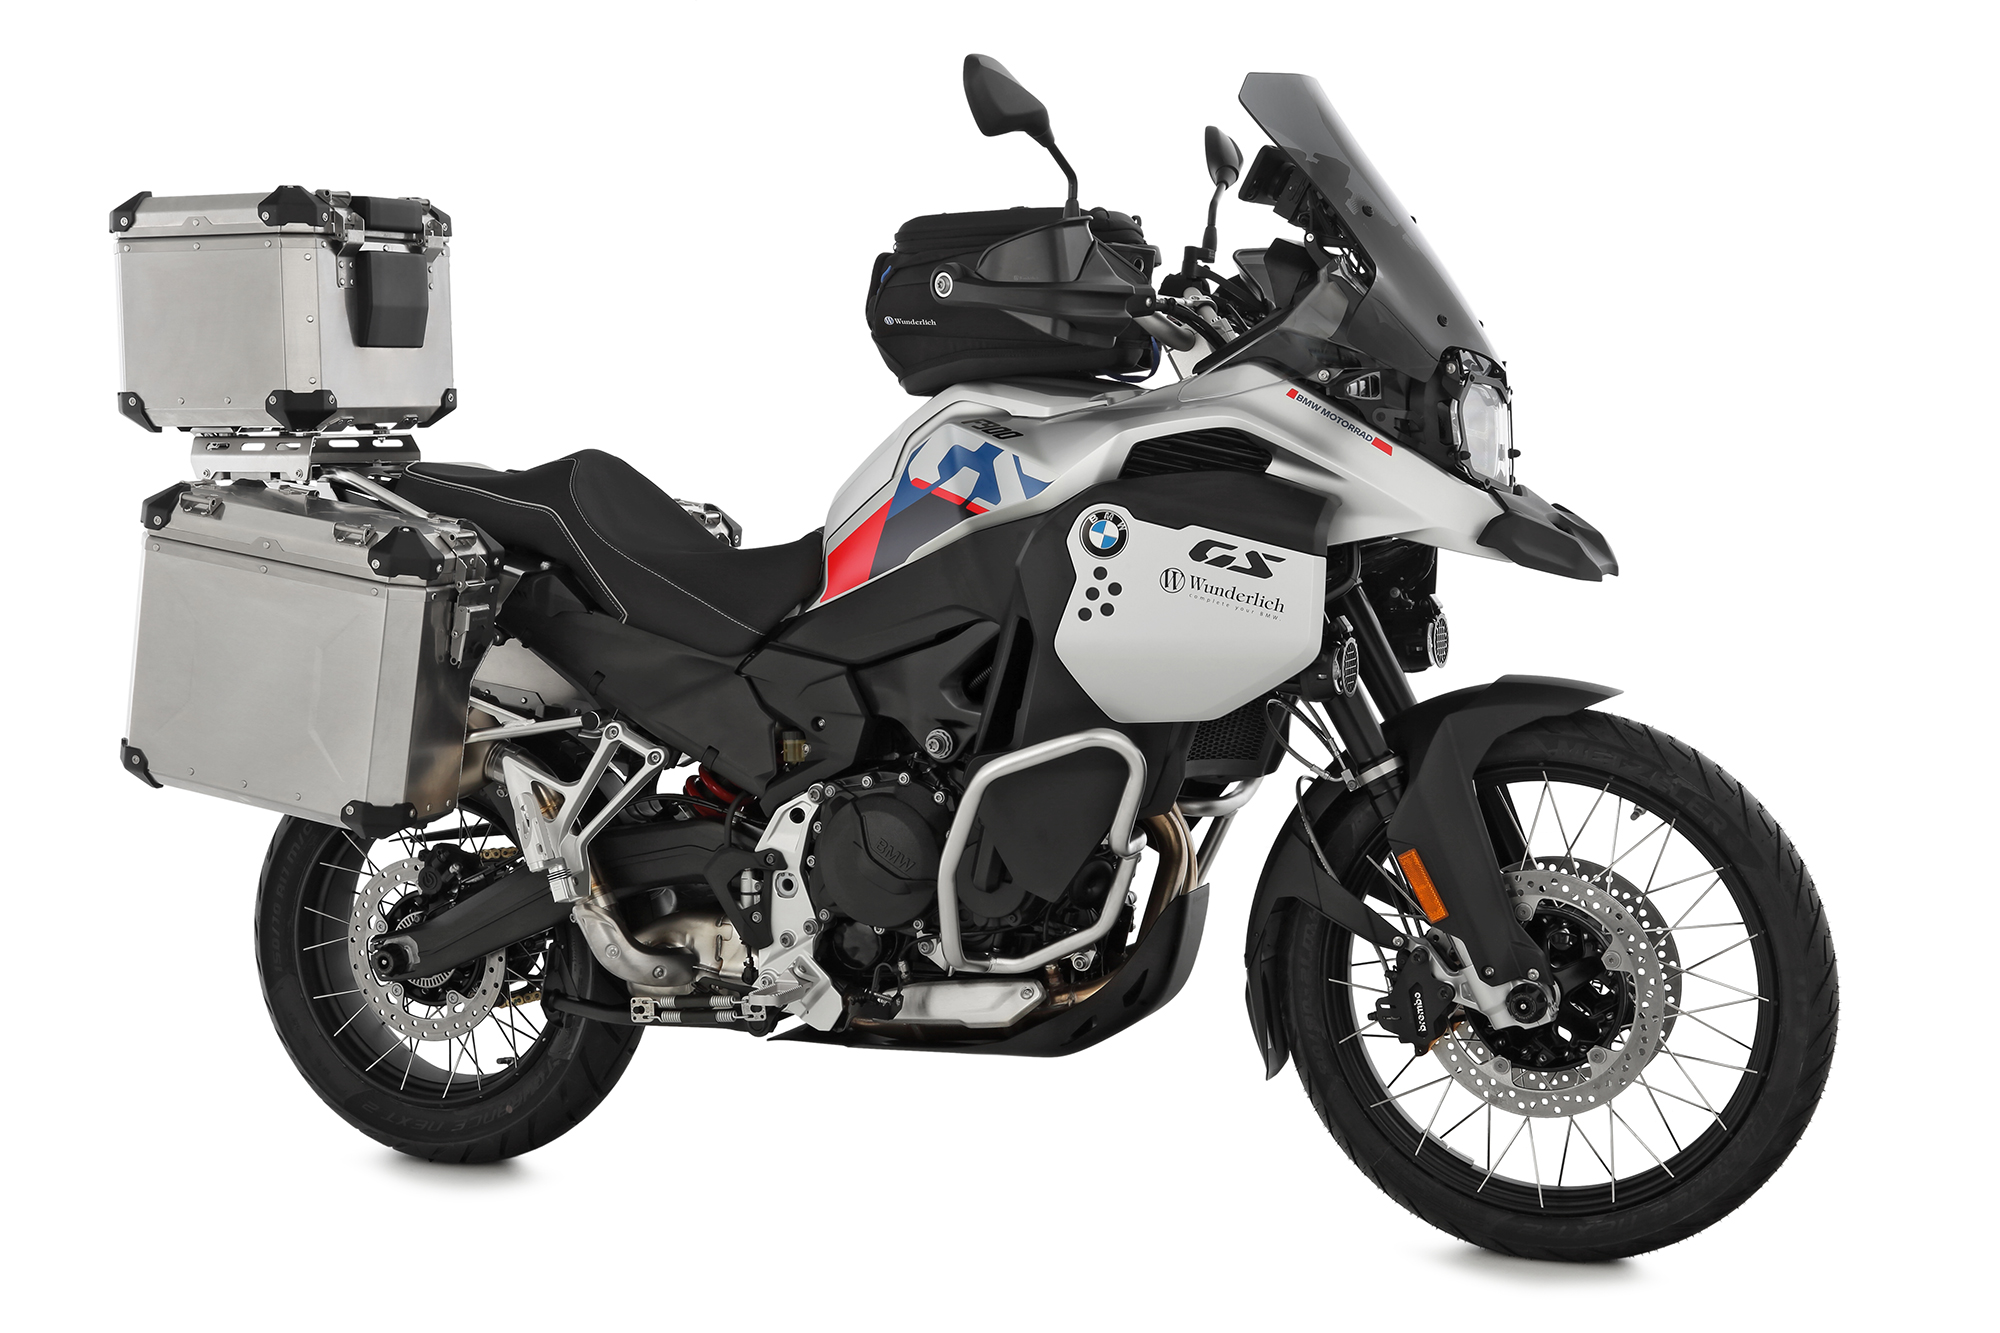 Wunderlich water cooler protection F 850 GS Advent